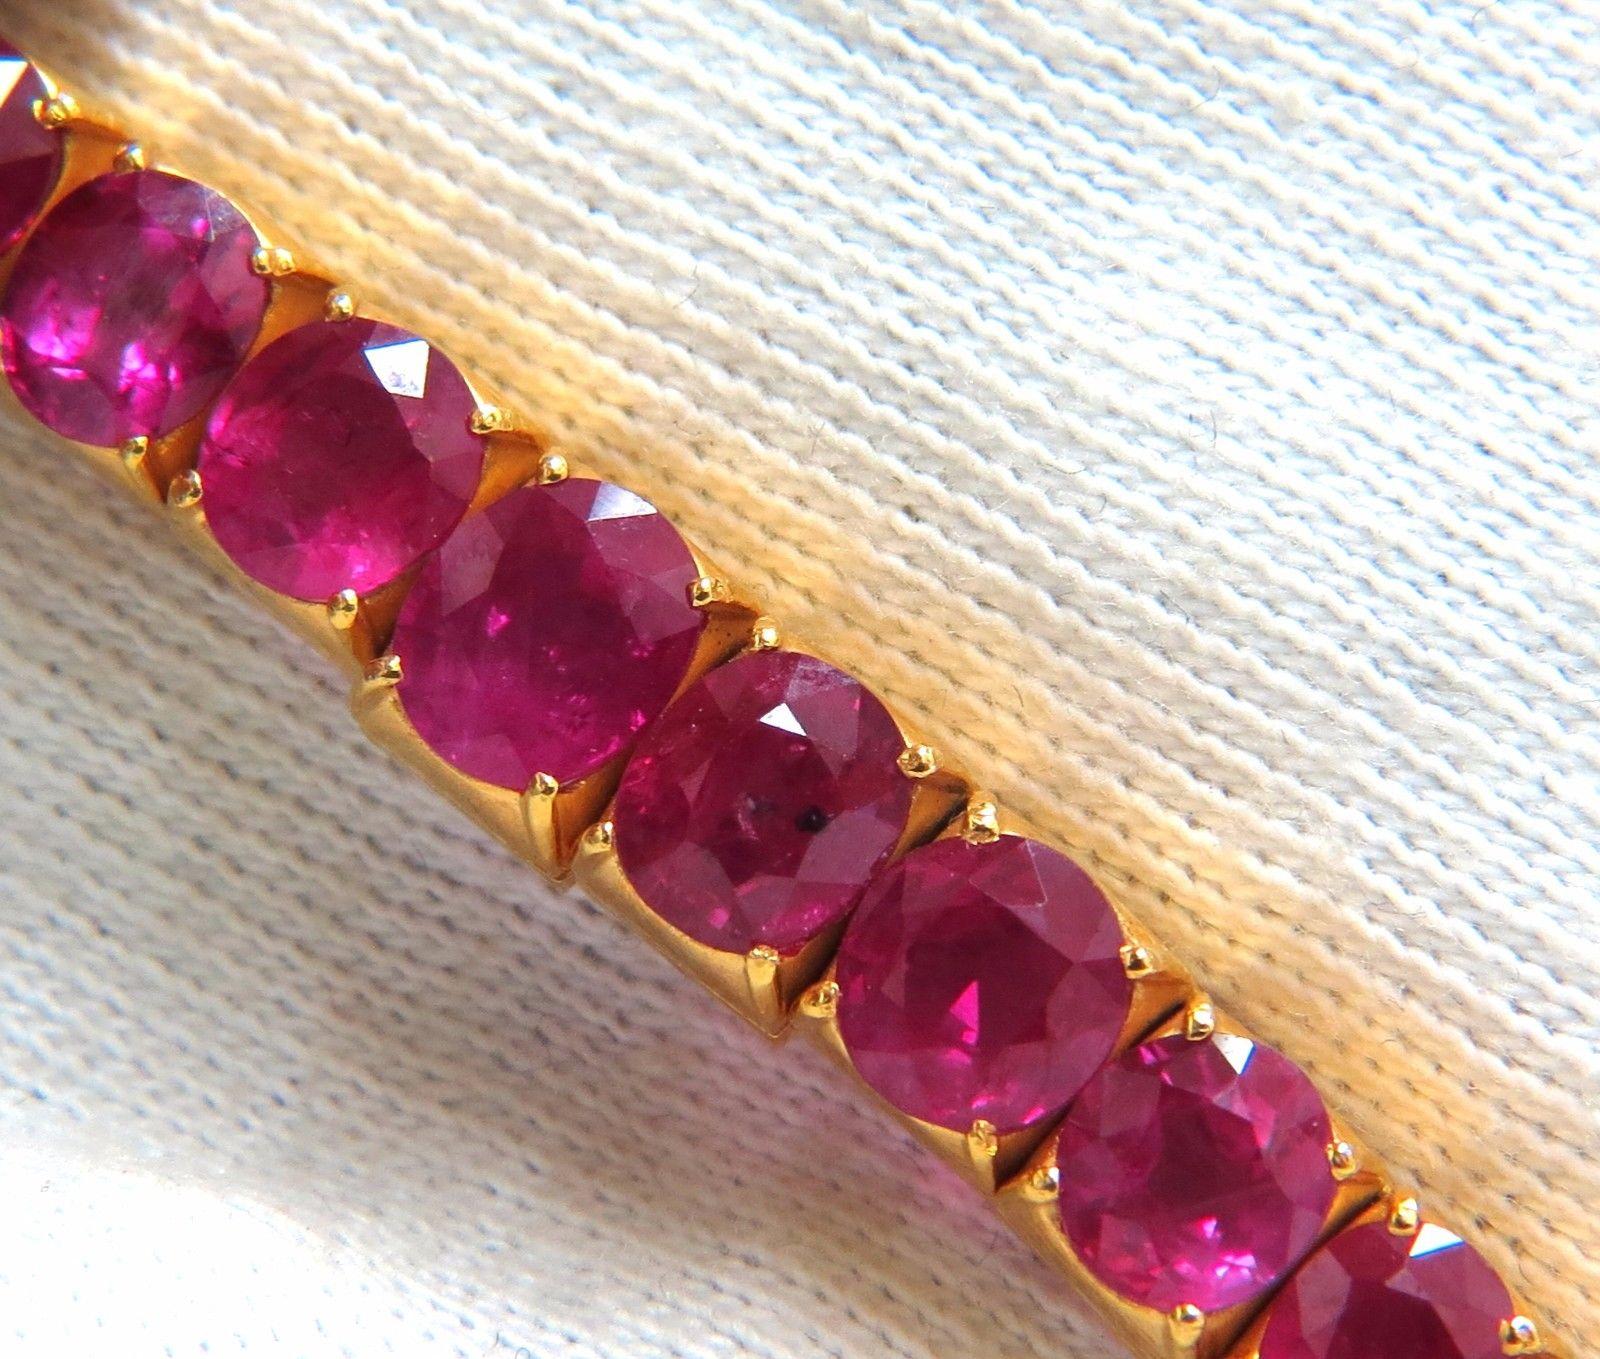 Red Classics.

 33.19ct. Natural Ruby necklace.

The Mod Tennis Comfort Elegance.

Oval Shapes, Full cut

clean clarity and transparent. 

 Vivid Reds.

47 Rubies

Tested, Only Heat Treated.

Ranging from: 4.2 x 4mm to 6.8 x 5.8mm

18kt yelow